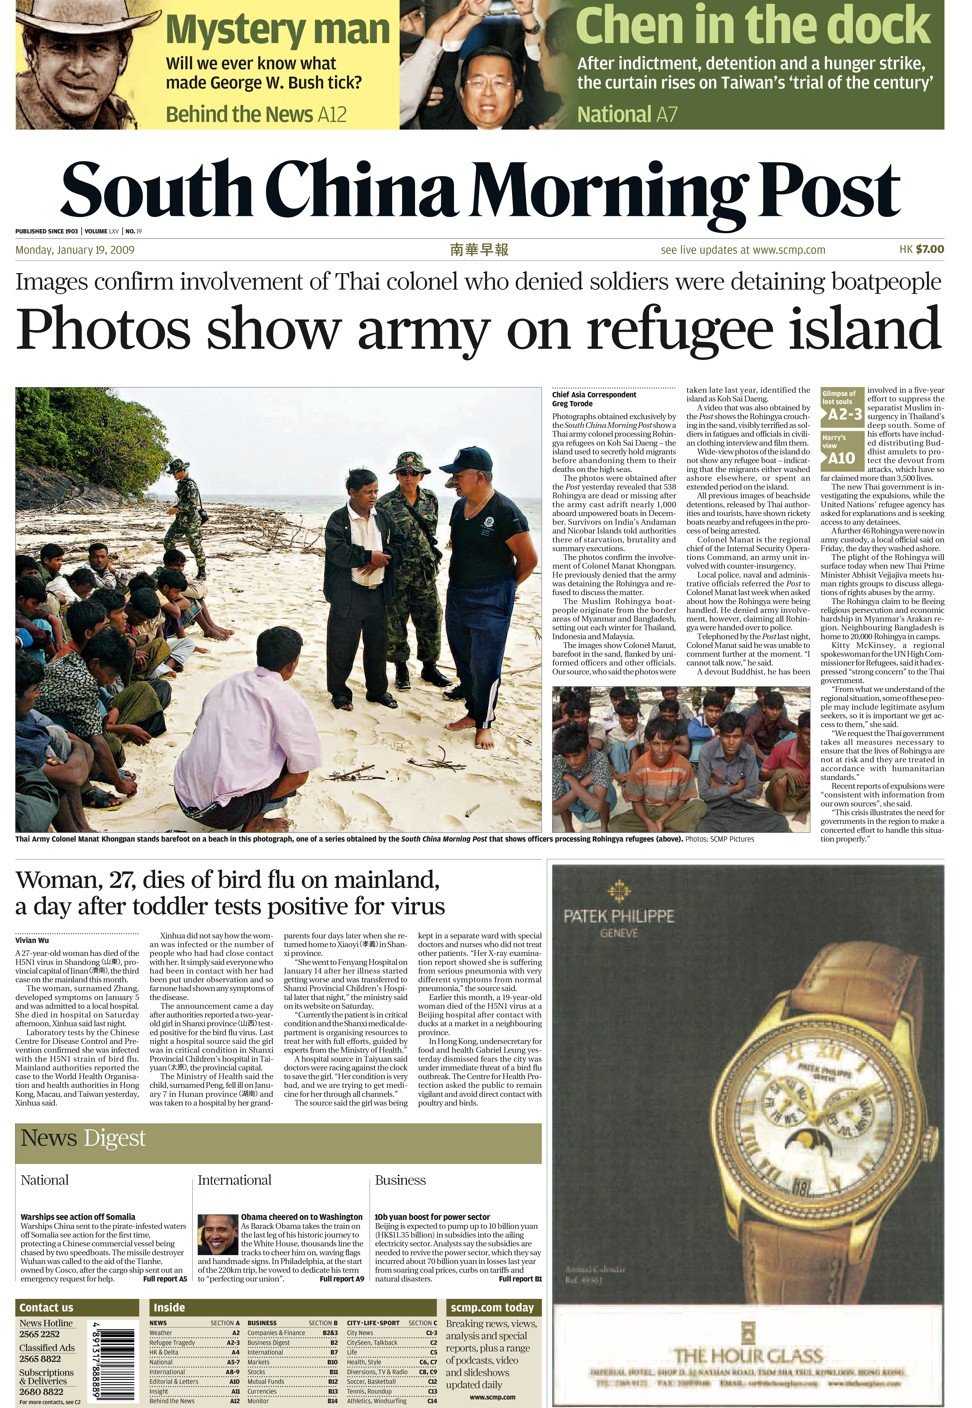 The Post’s coverage from January 2009.